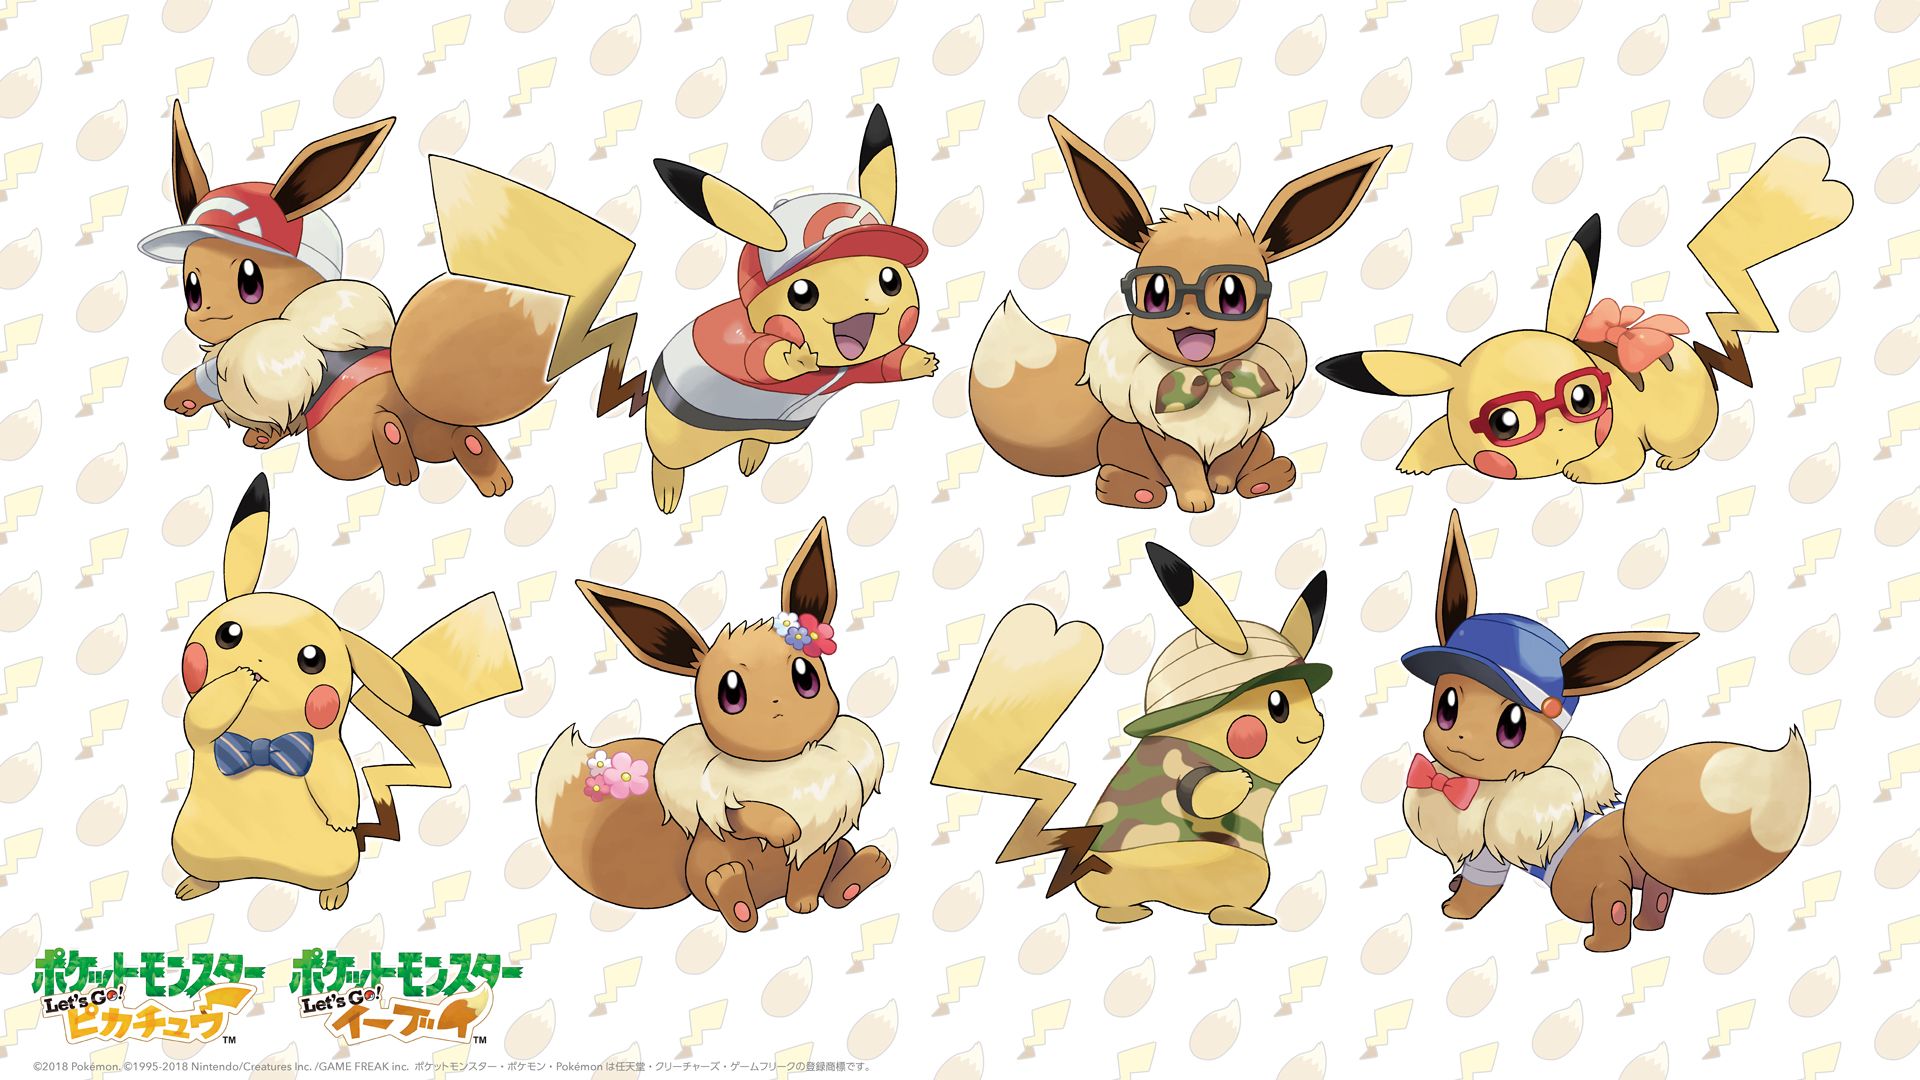 Download This Pokemon Let's GO Pikachu Eevee Wallpaper For Your PC And Smartphone